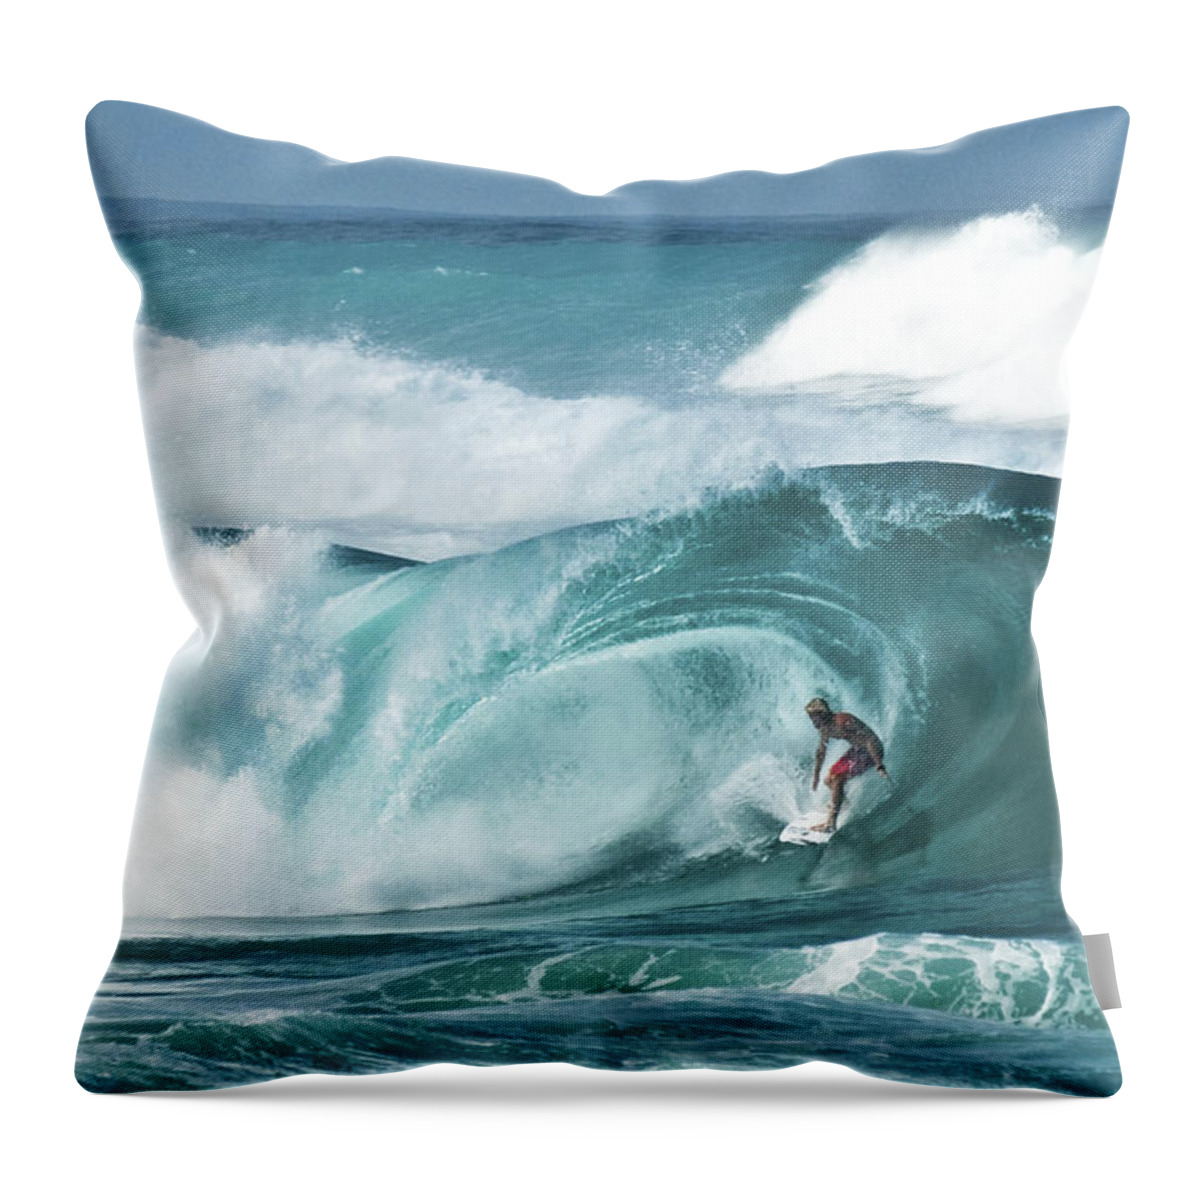 Surfer Throw Pillow featuring the photograph Dream Surf by Steven Sparks